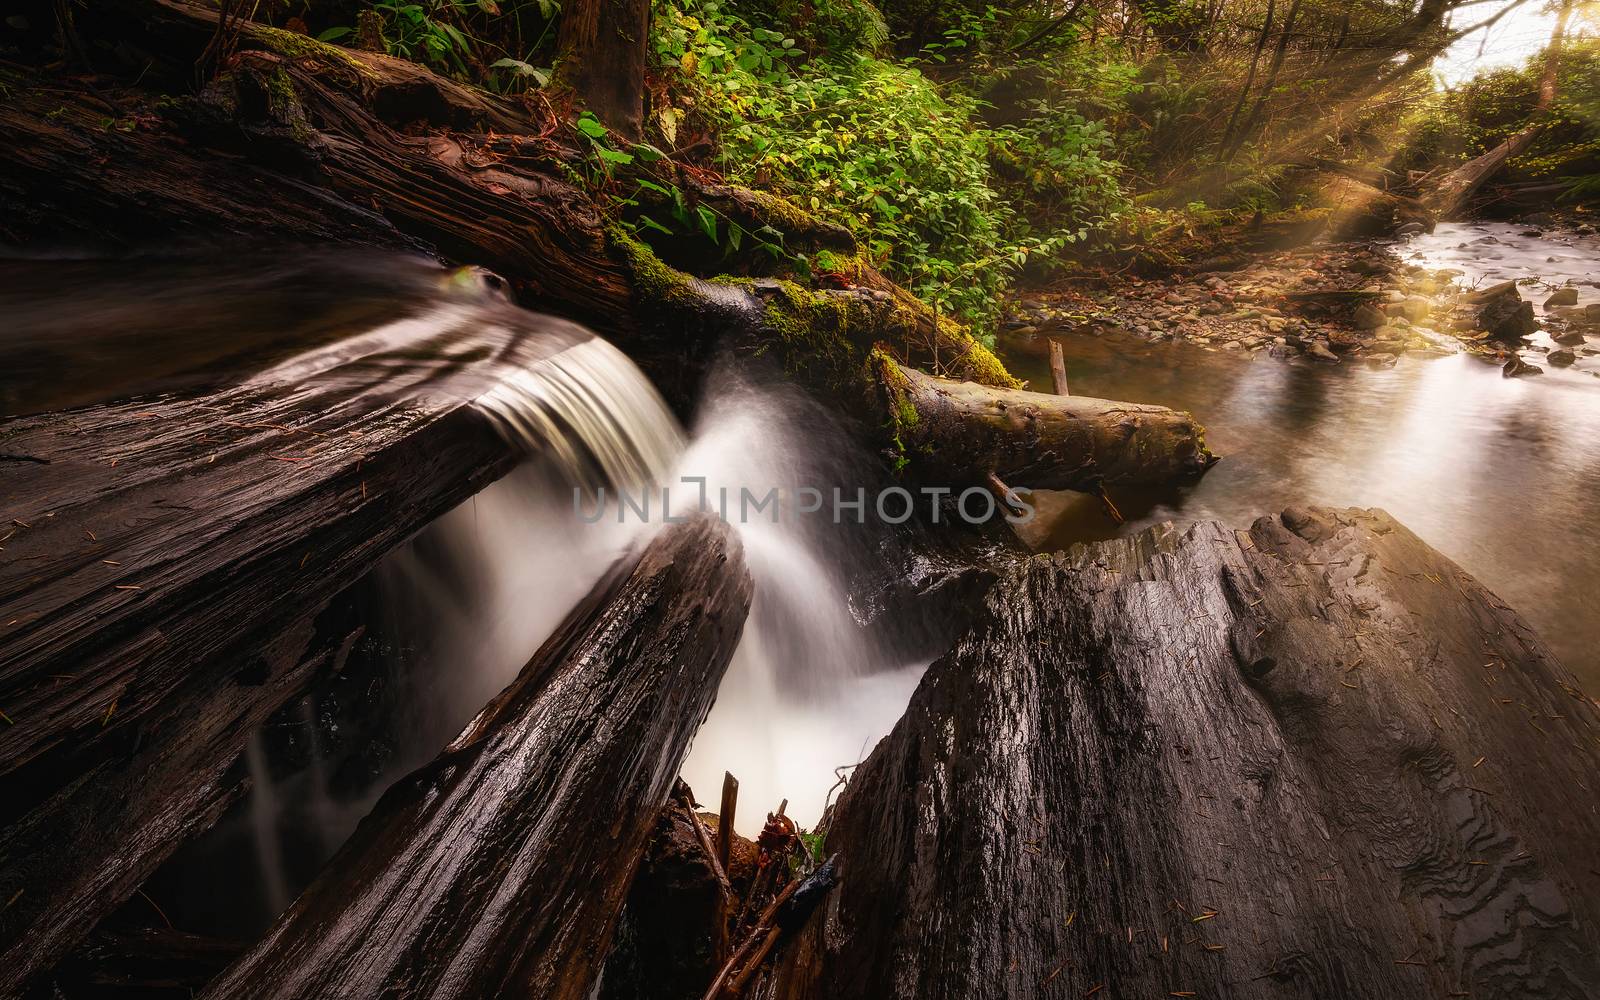 A waterfall in the mountains of Northern California. Color image, day.